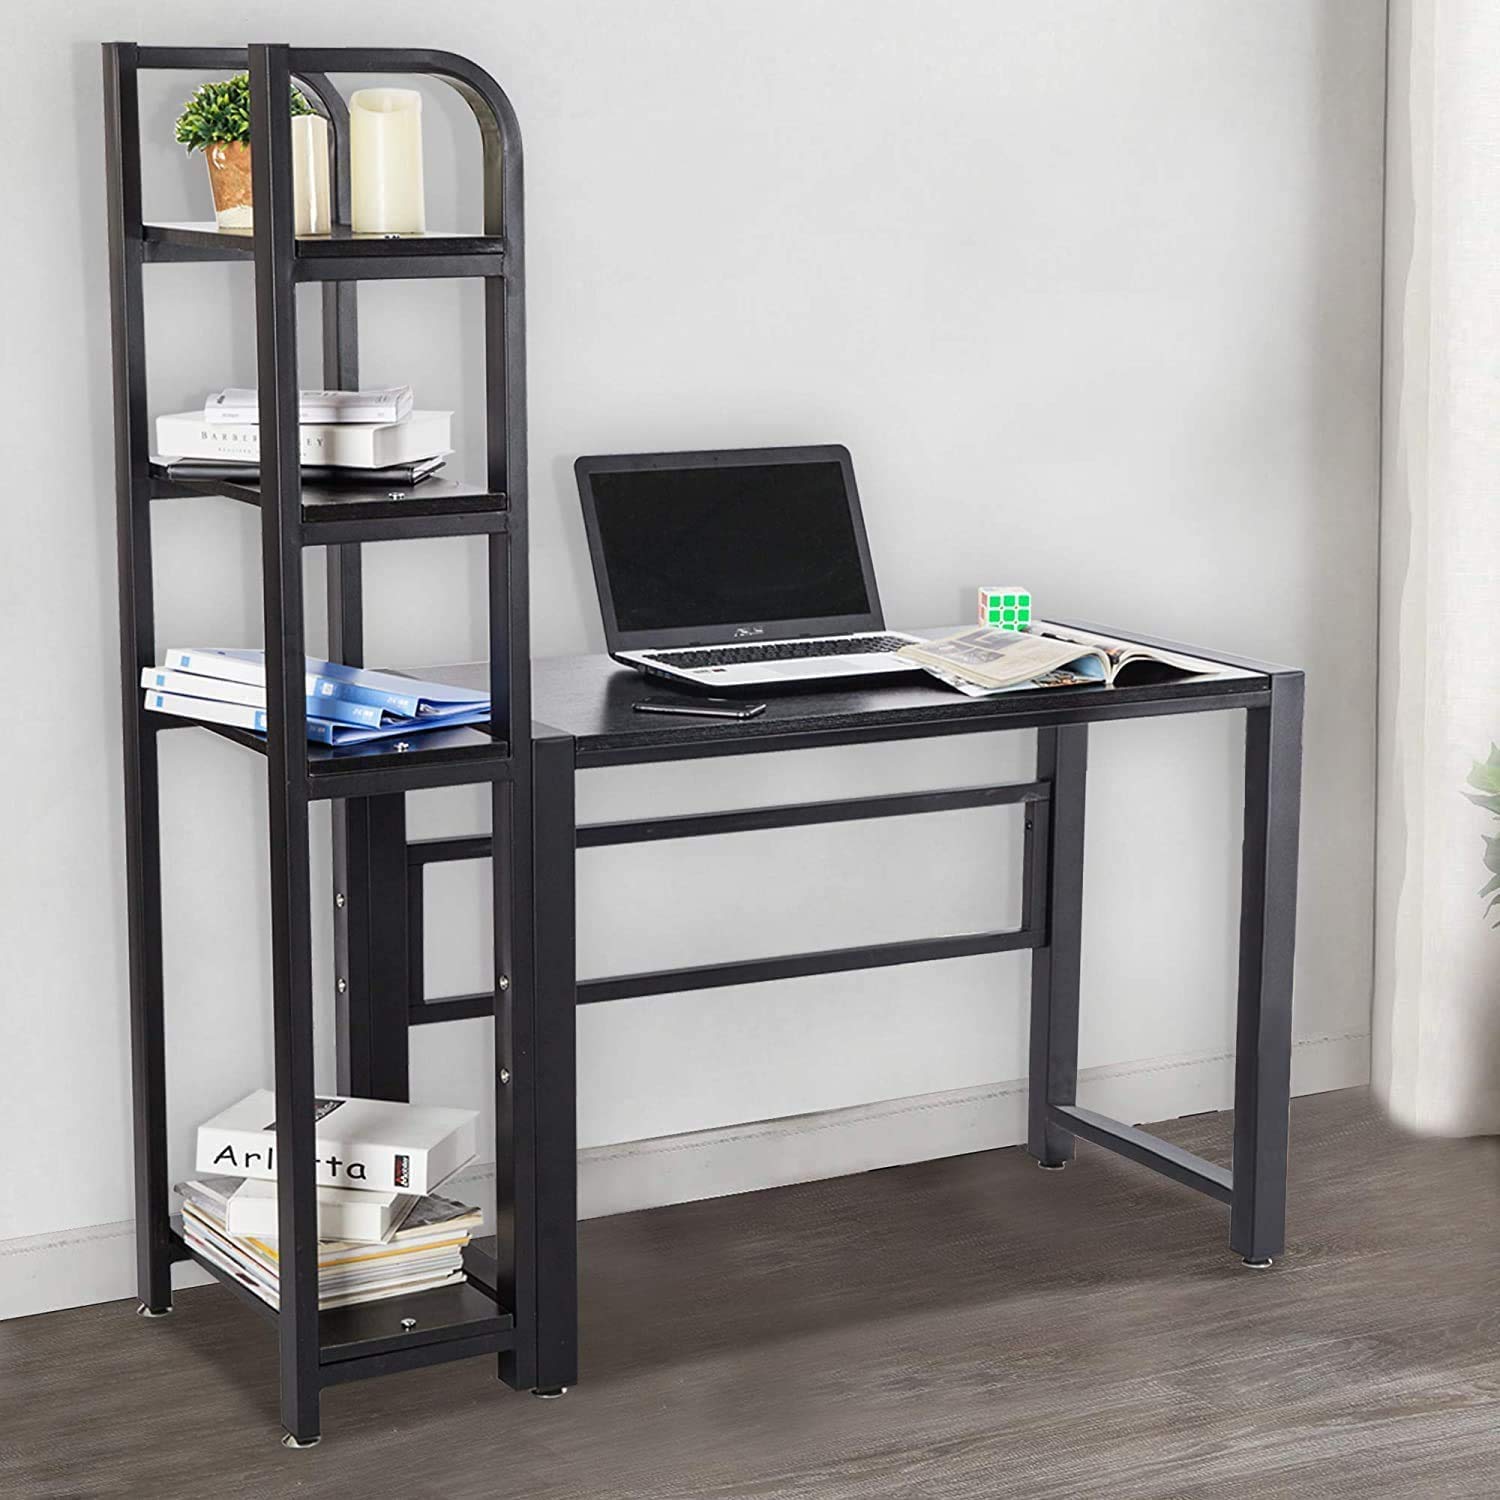 Computer Desk for Home Office - 50" Writing Study Table with 4 Tier Bookshelf - Multipurpose Modern Wood Desk Workstation with Metal Frame for ...